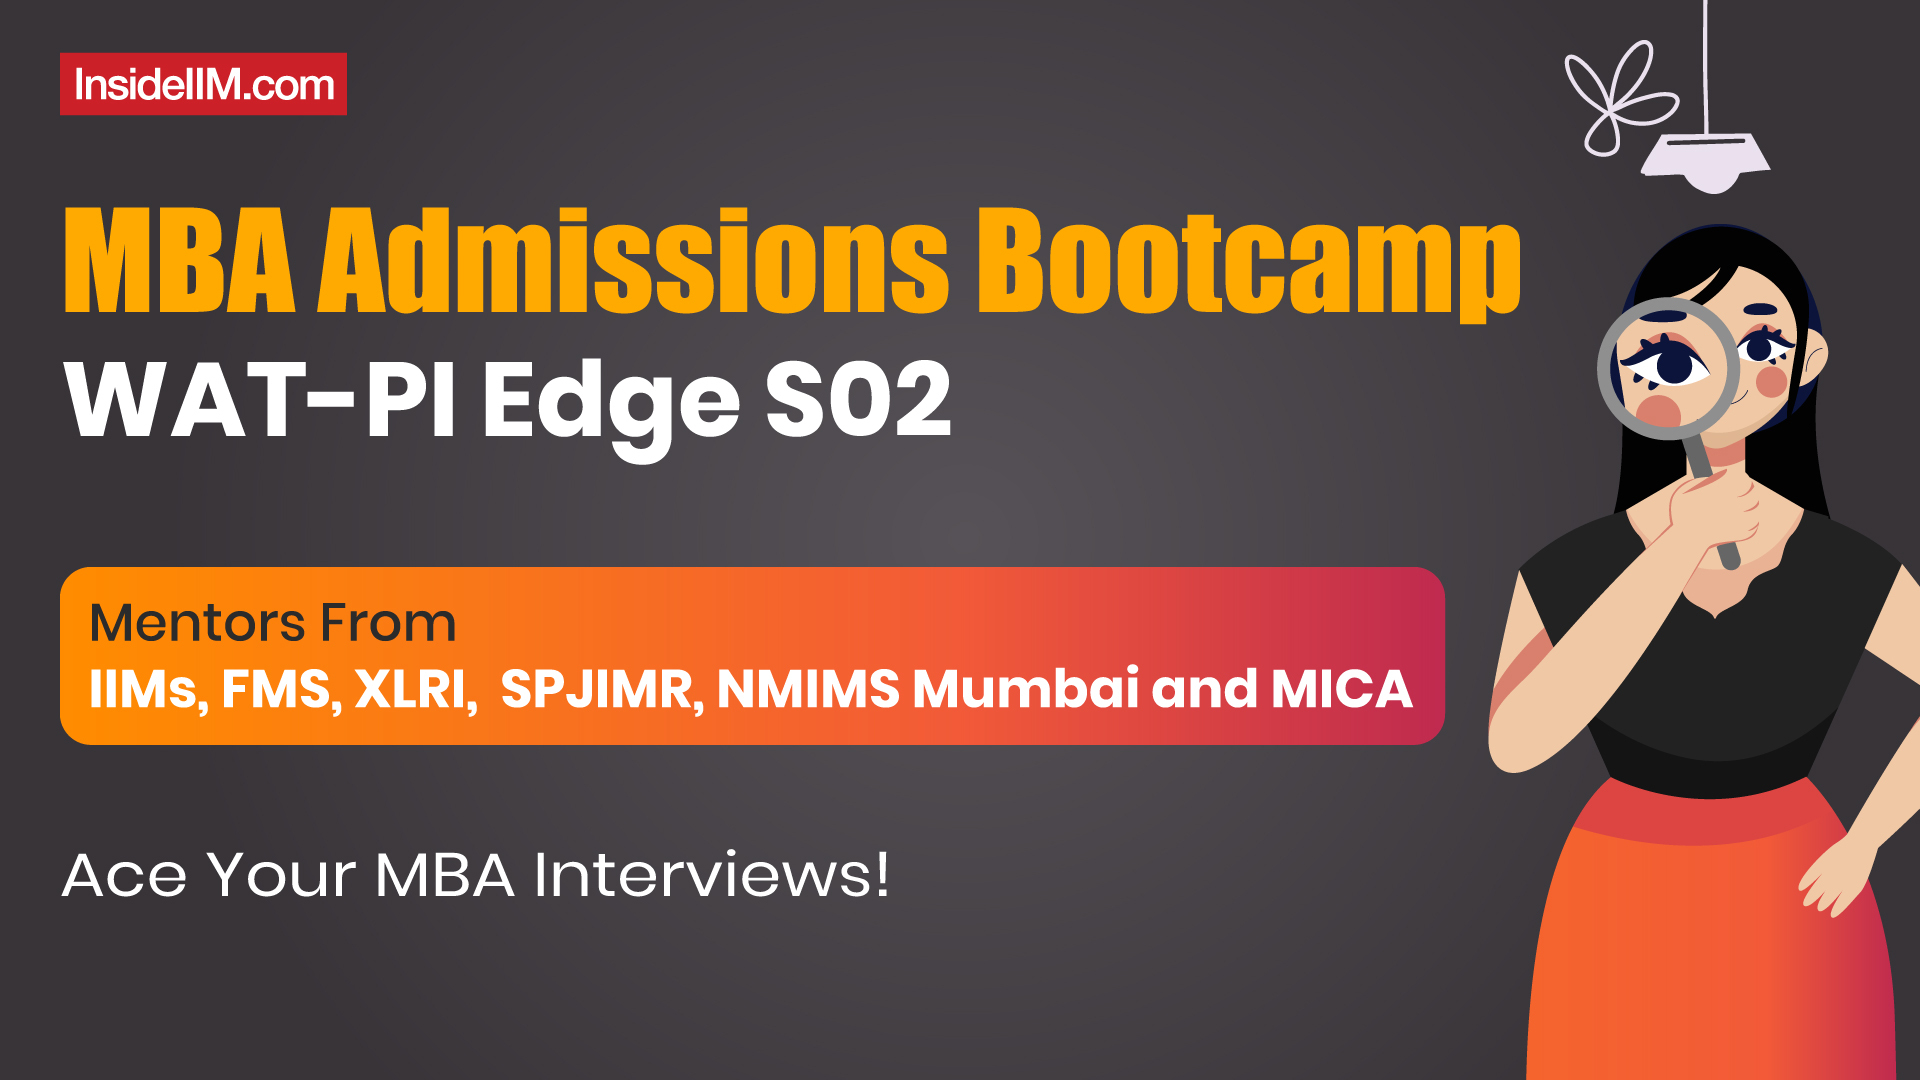 Ace Your MBA Interviews With MBA Admissions Bootcamp - WAT-PI Edge S02 | Check Details Here!